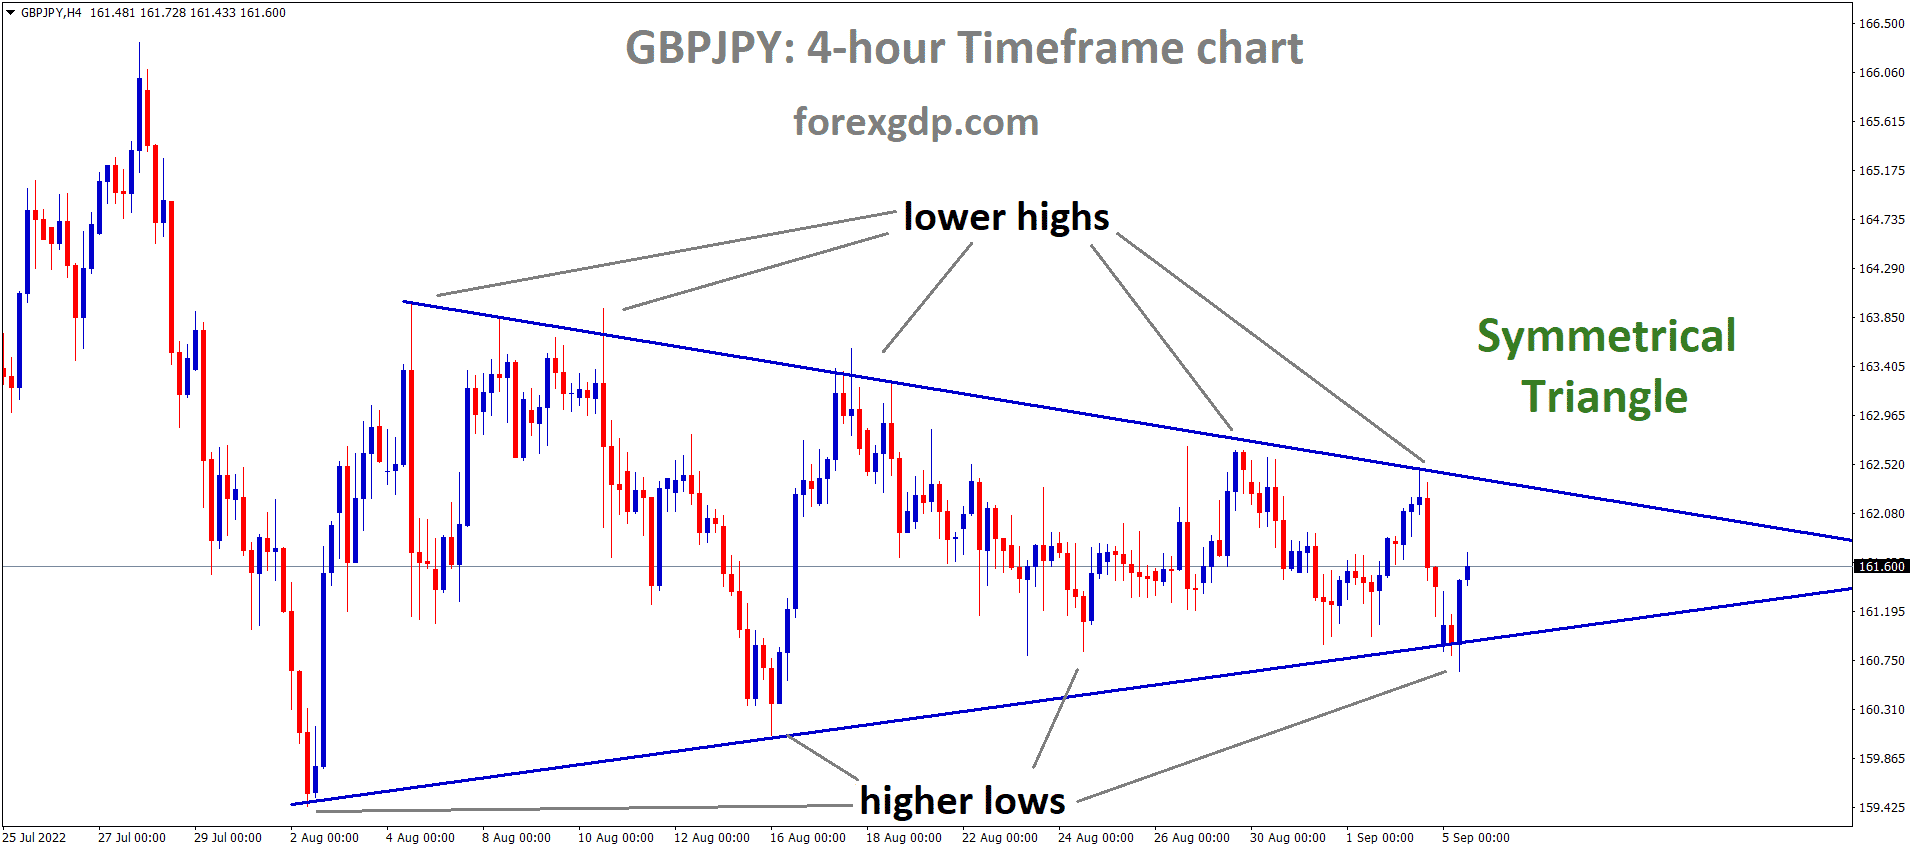 GBPJPY is moving in the Symmetrical Triangle pattern and the market has rebounded from the bottom area of the pattern